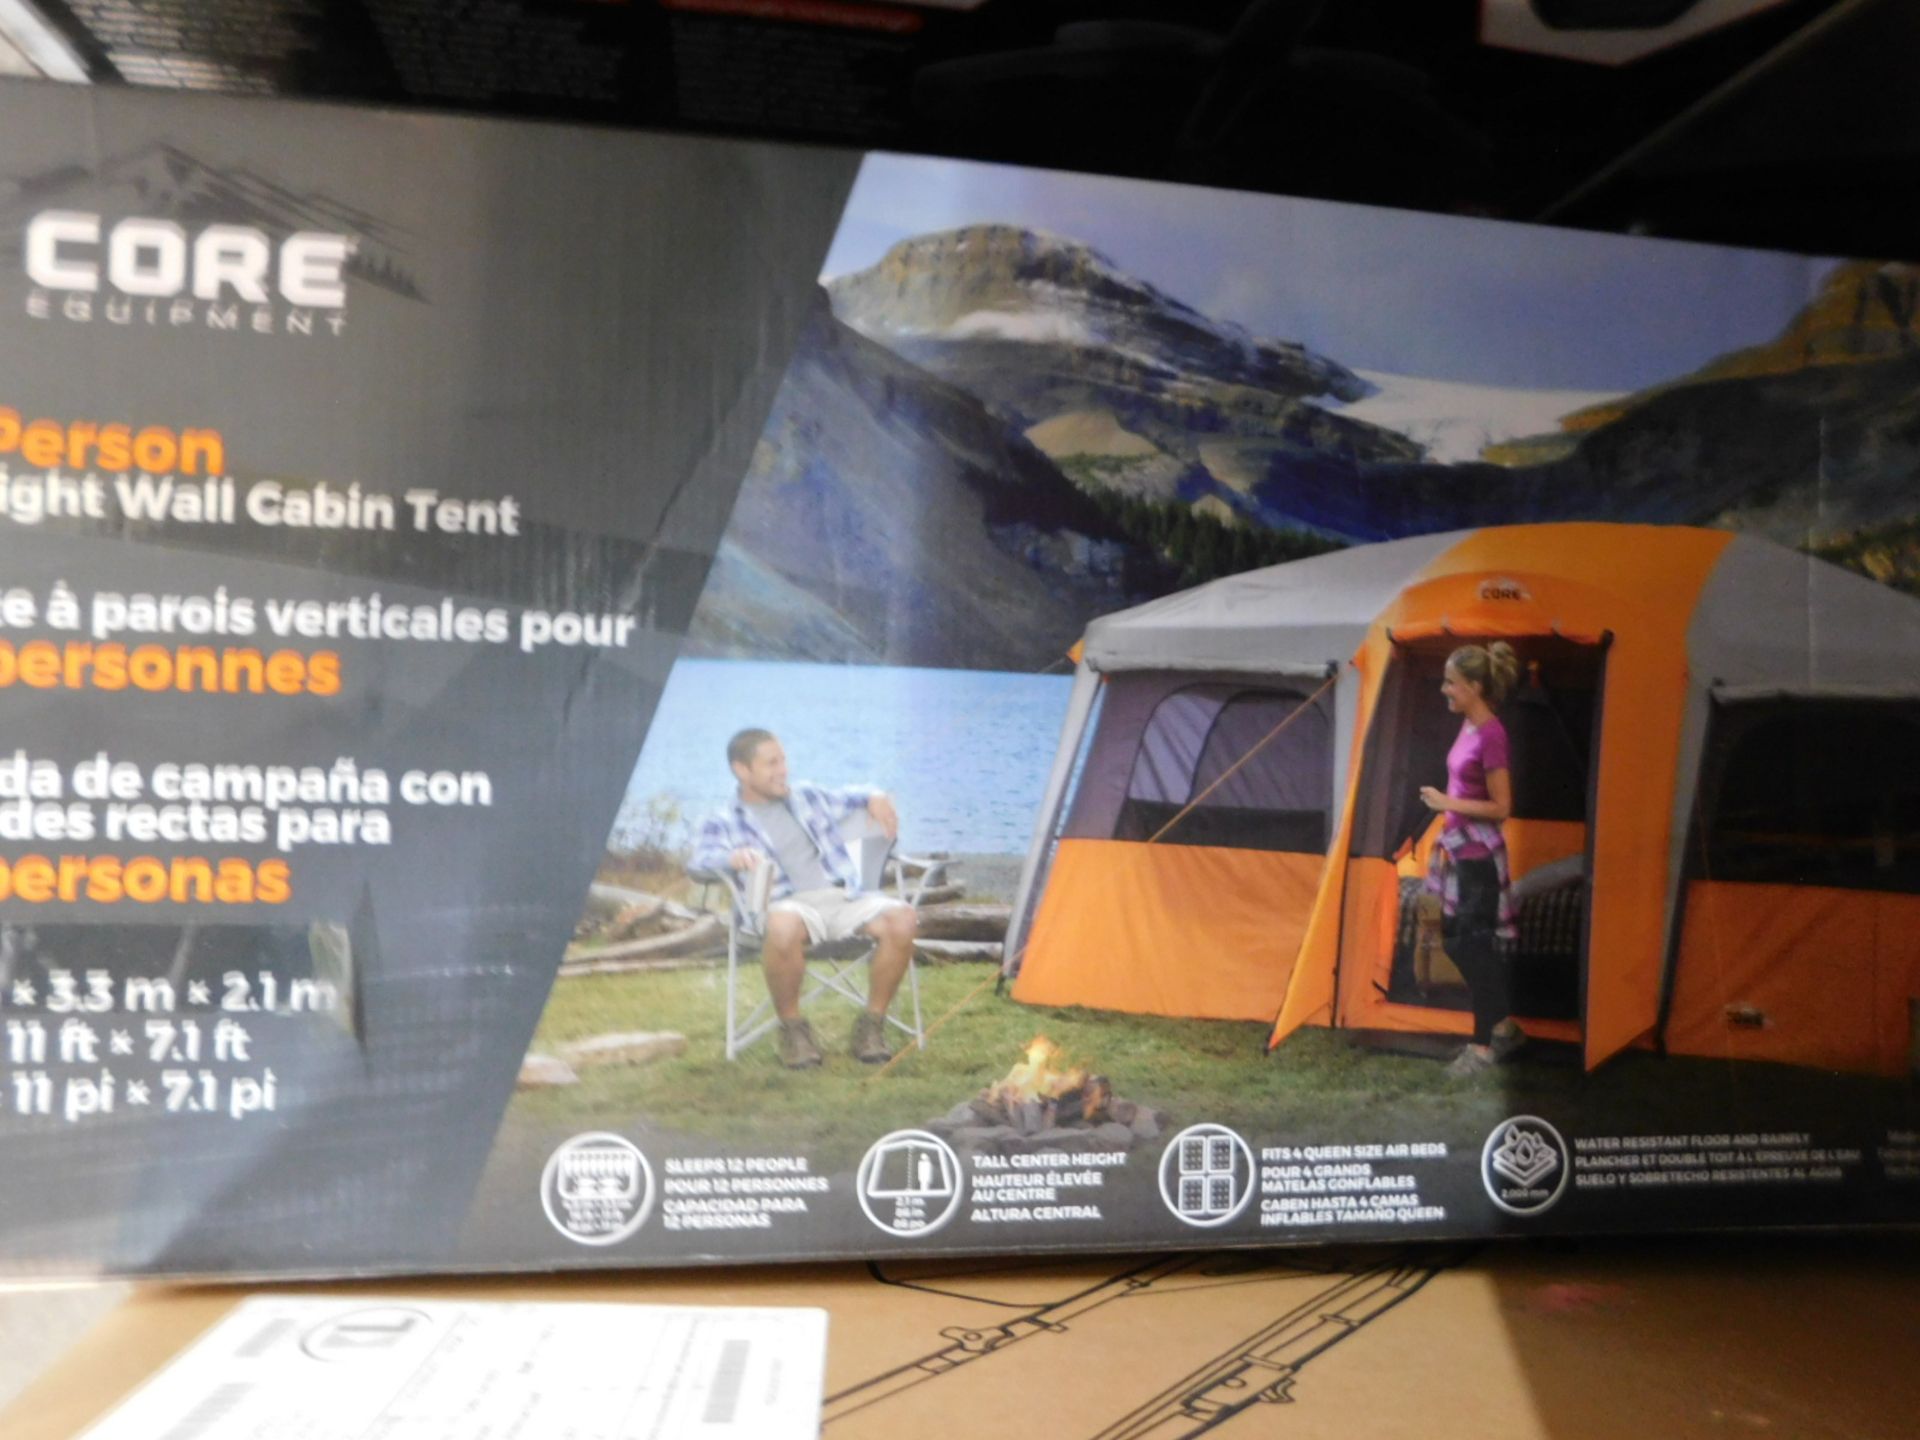 1 BOXED CORE 12 PERSON STRAIGHT WALL CABIN TENT (4.8 M X 3.3 M) RRP Â£499